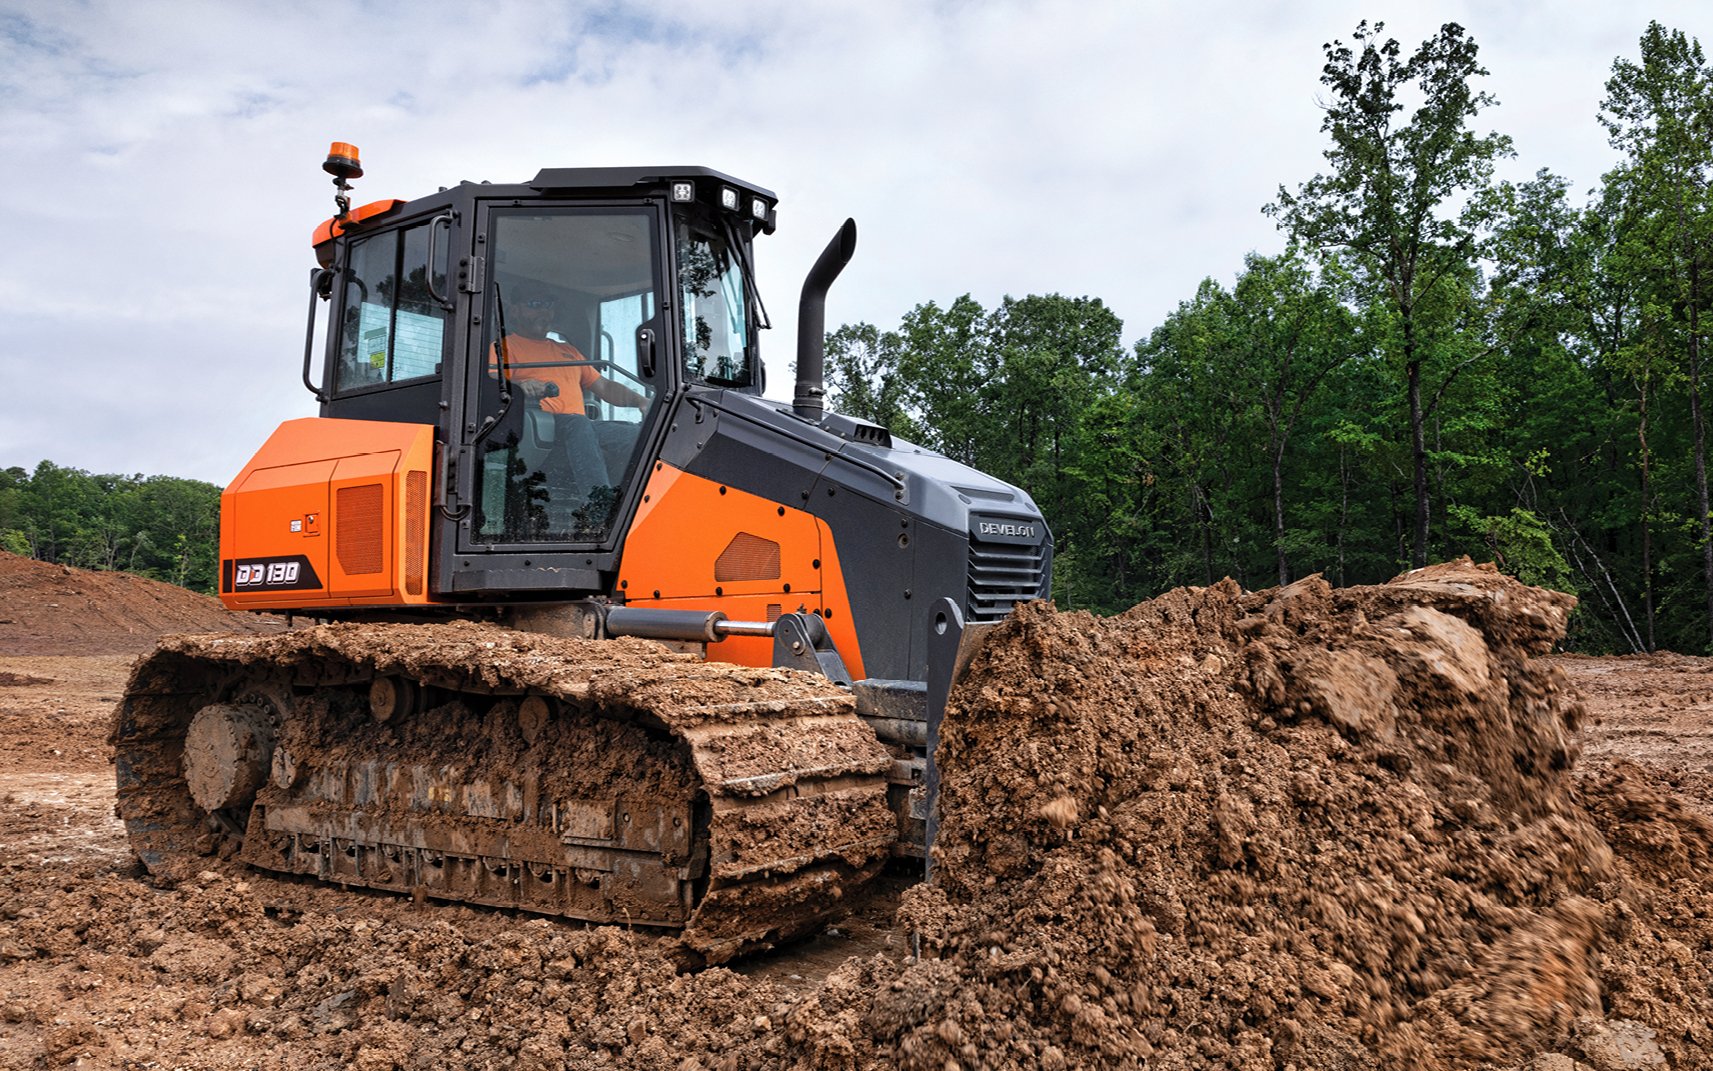 A DEVELON DD130 dozer pushes mud and dirt on a jobsite.